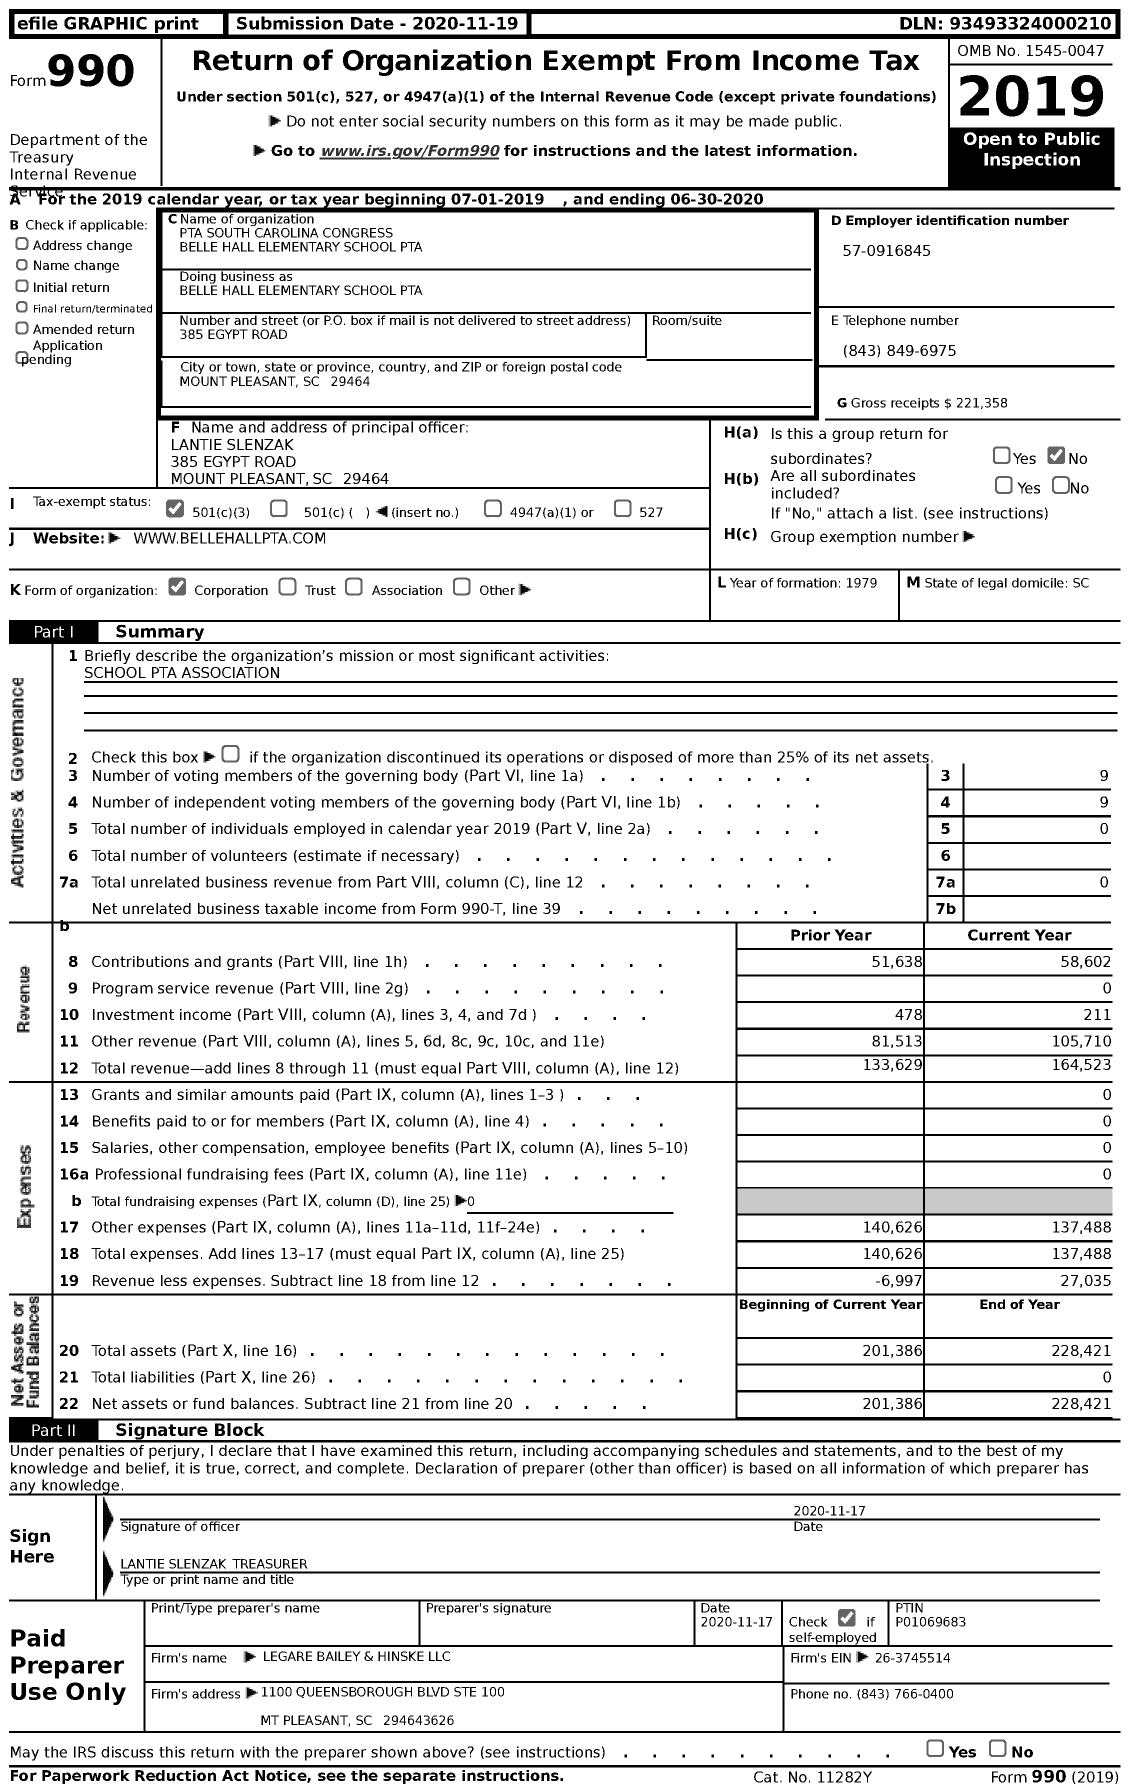 Image of first page of 2019 Form 990 for PTA South Carolina Congress Belle Hall Elementary School PTA